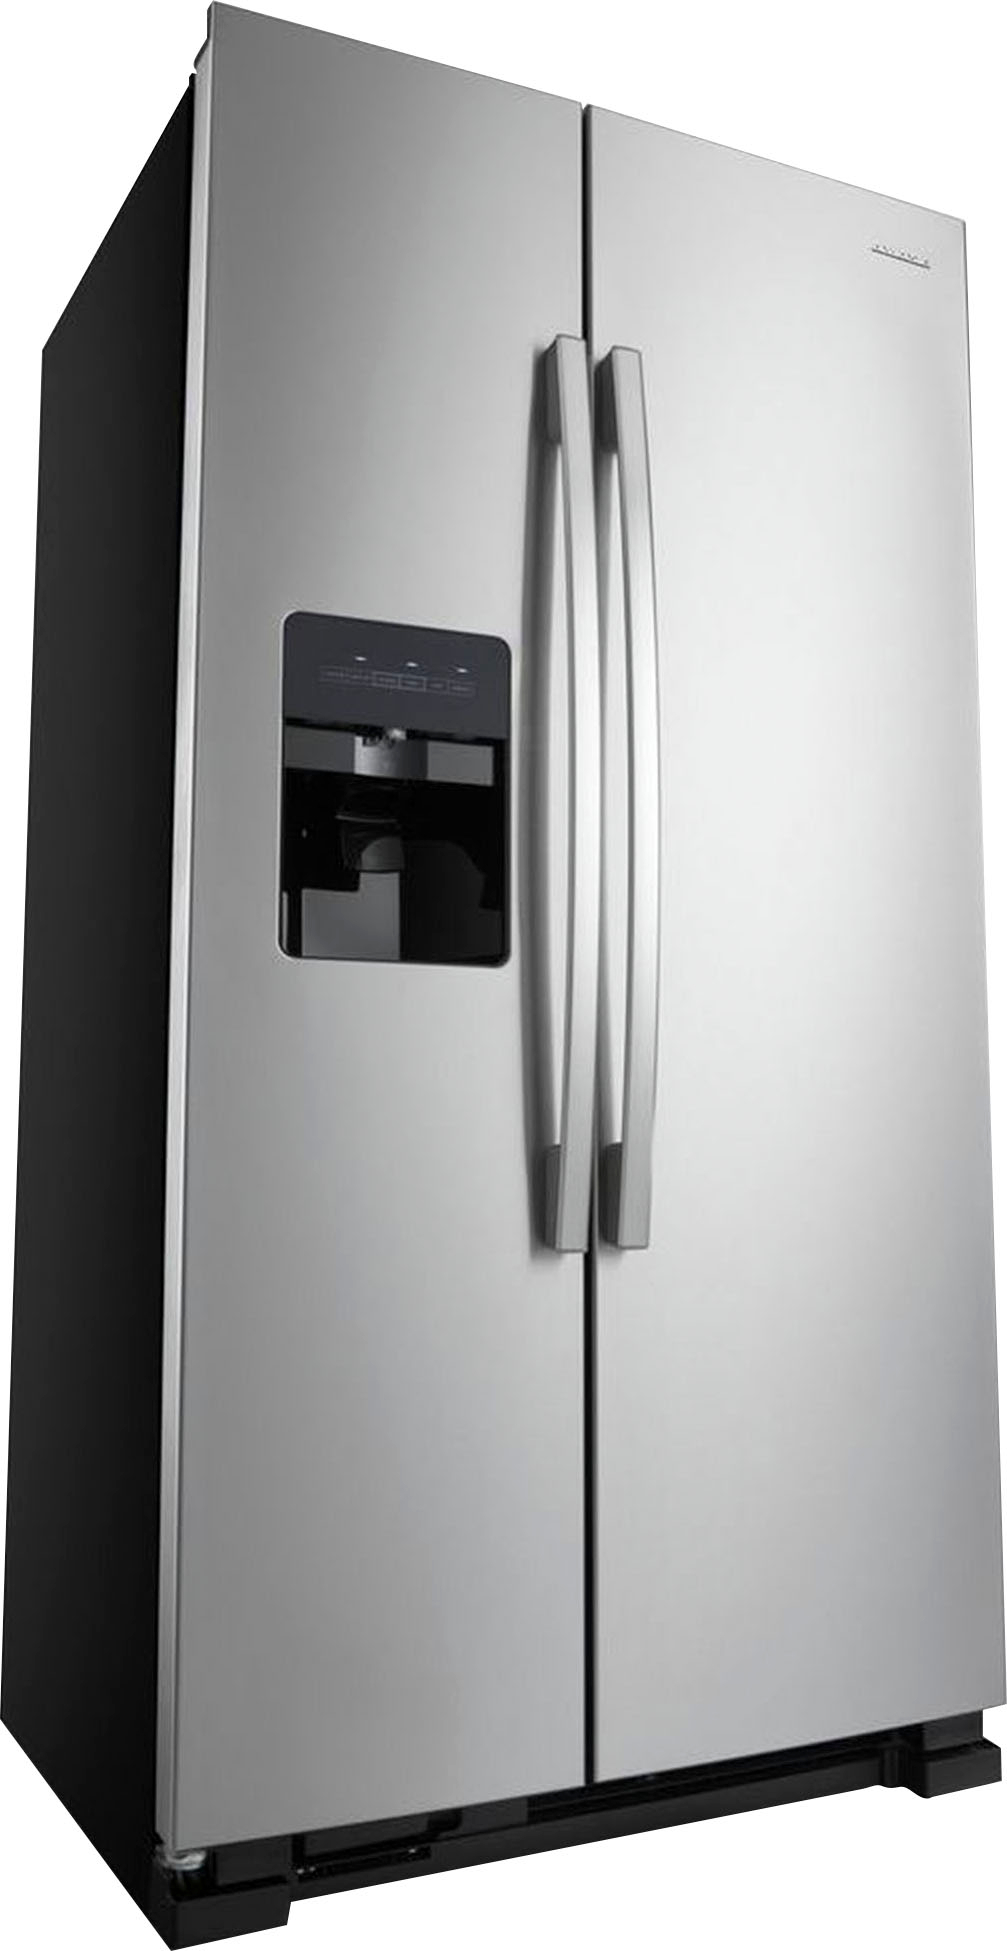 Angle View: Amana - 21.4 Cu. Ft. Side-by-Side Refrigerator - Stainless steel